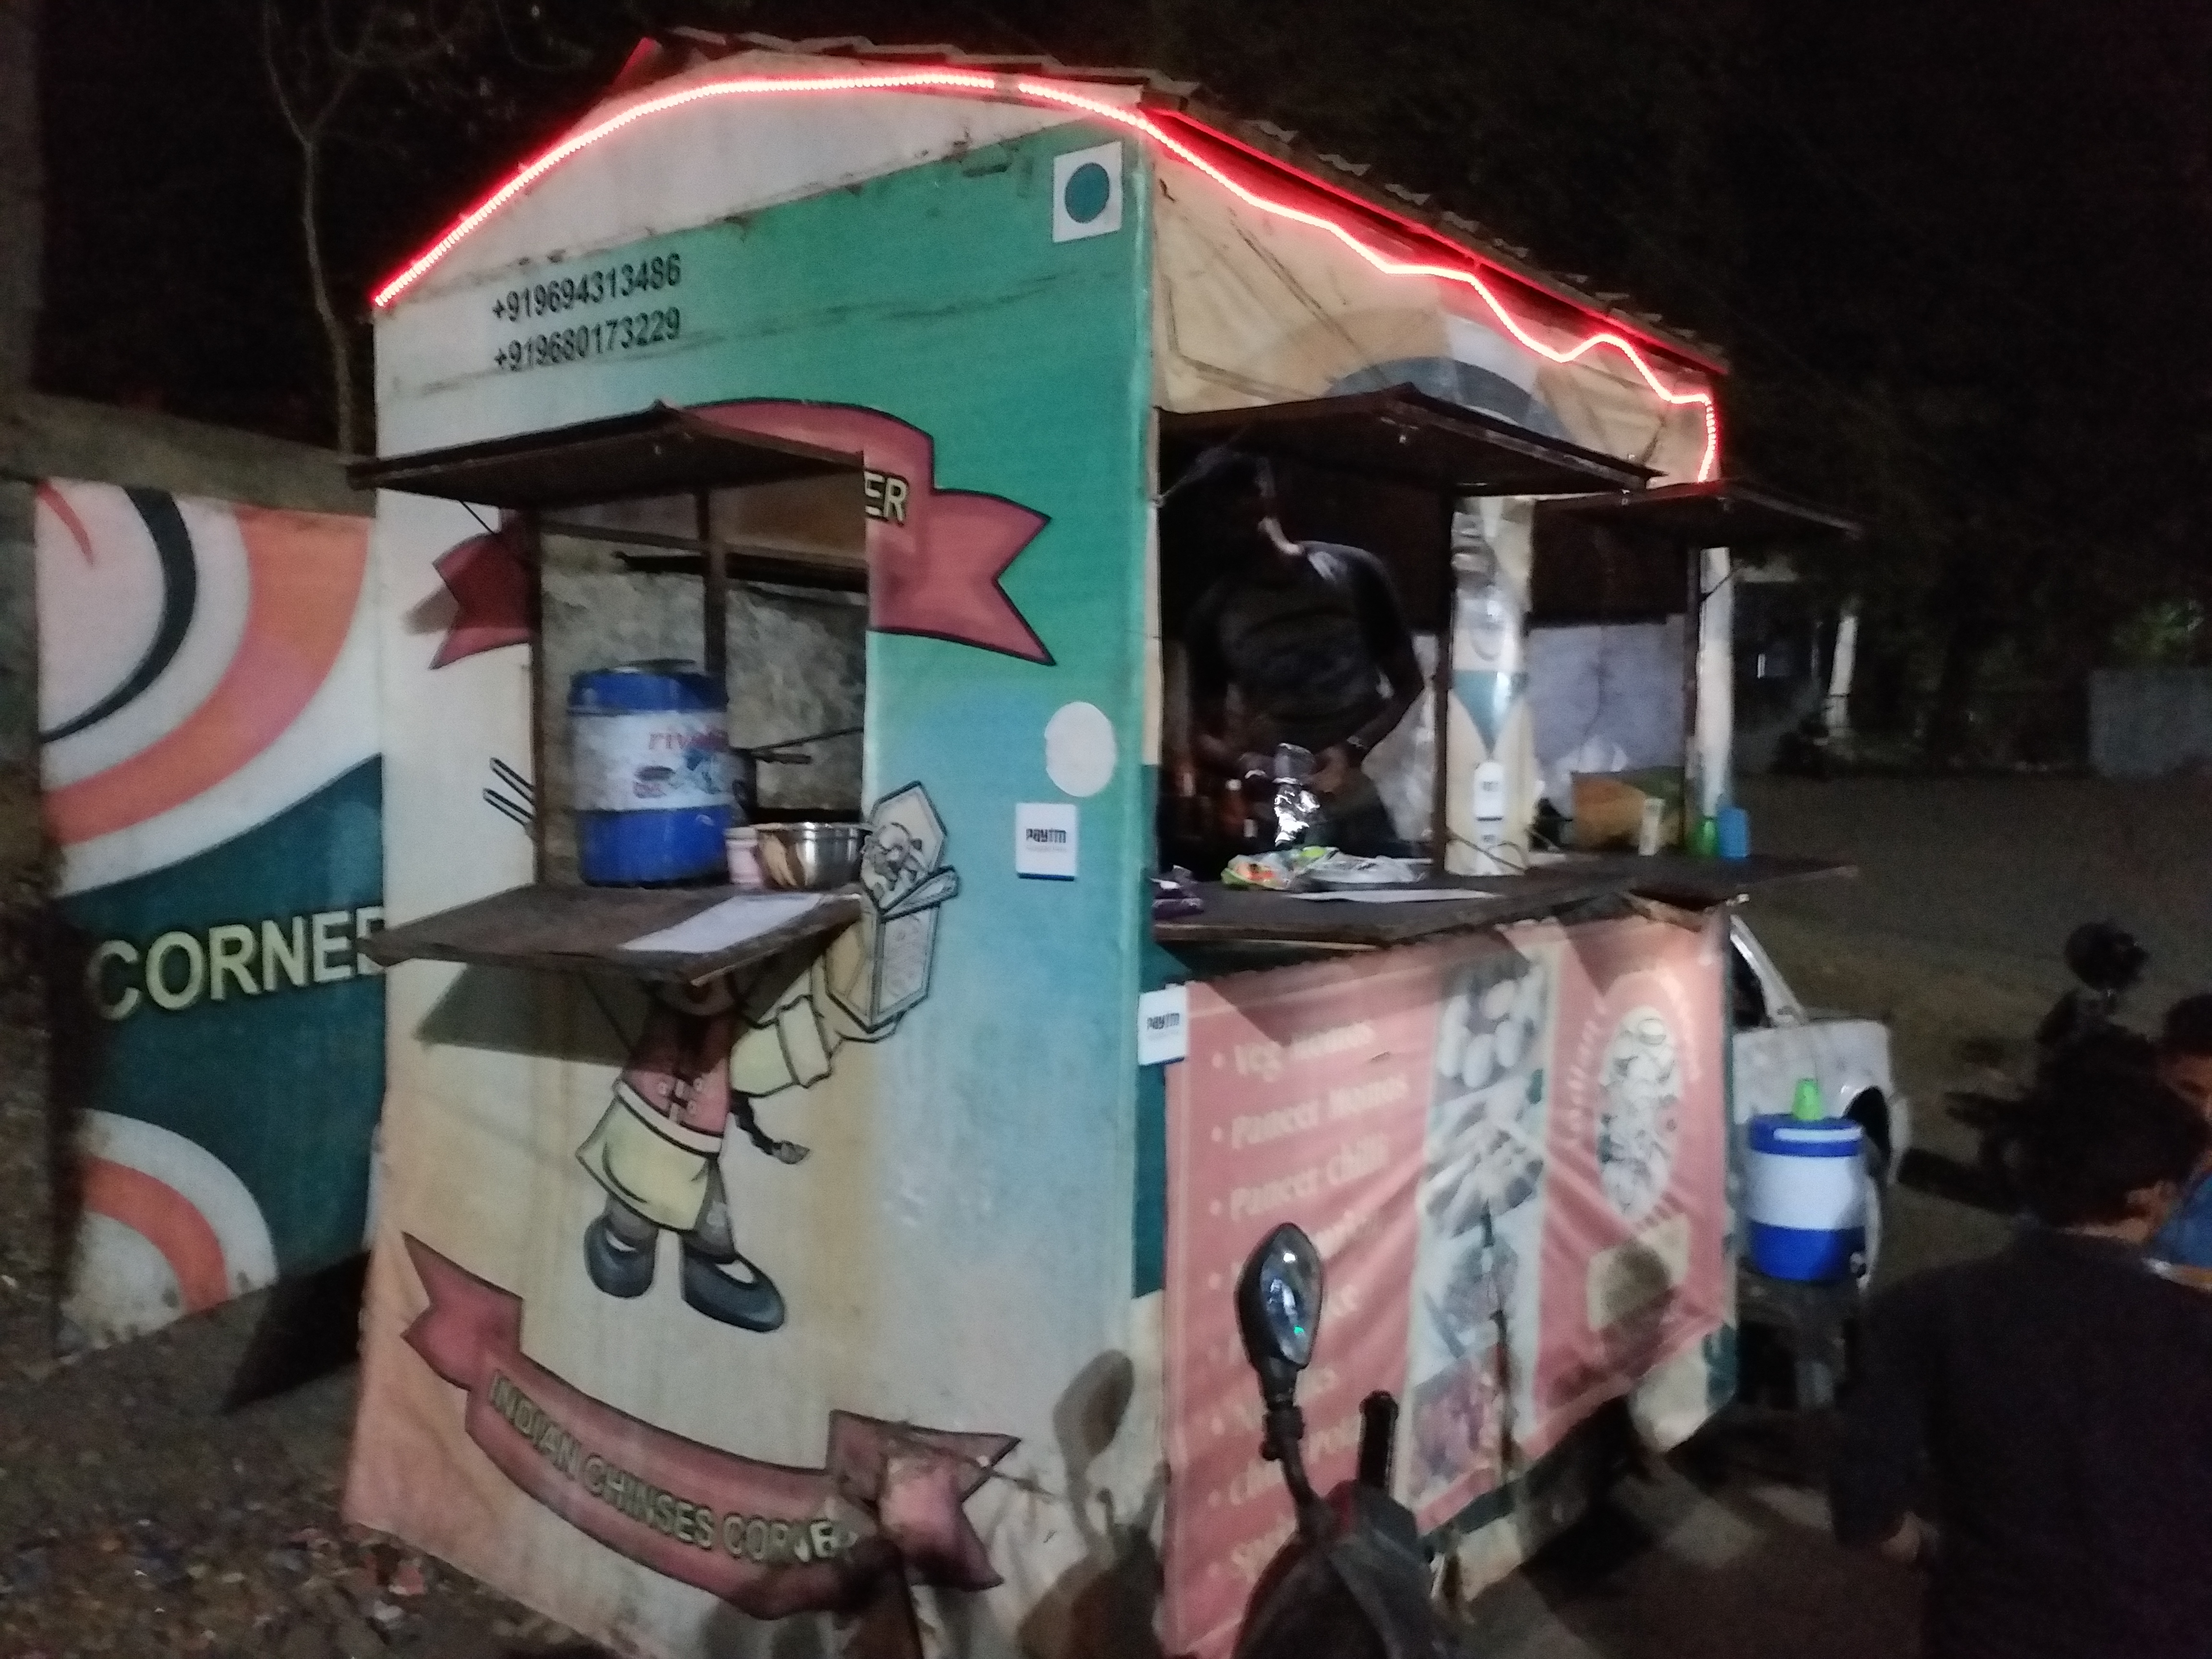 Getting along with the food truck fad - Here's a list of Udaipur's food trucks